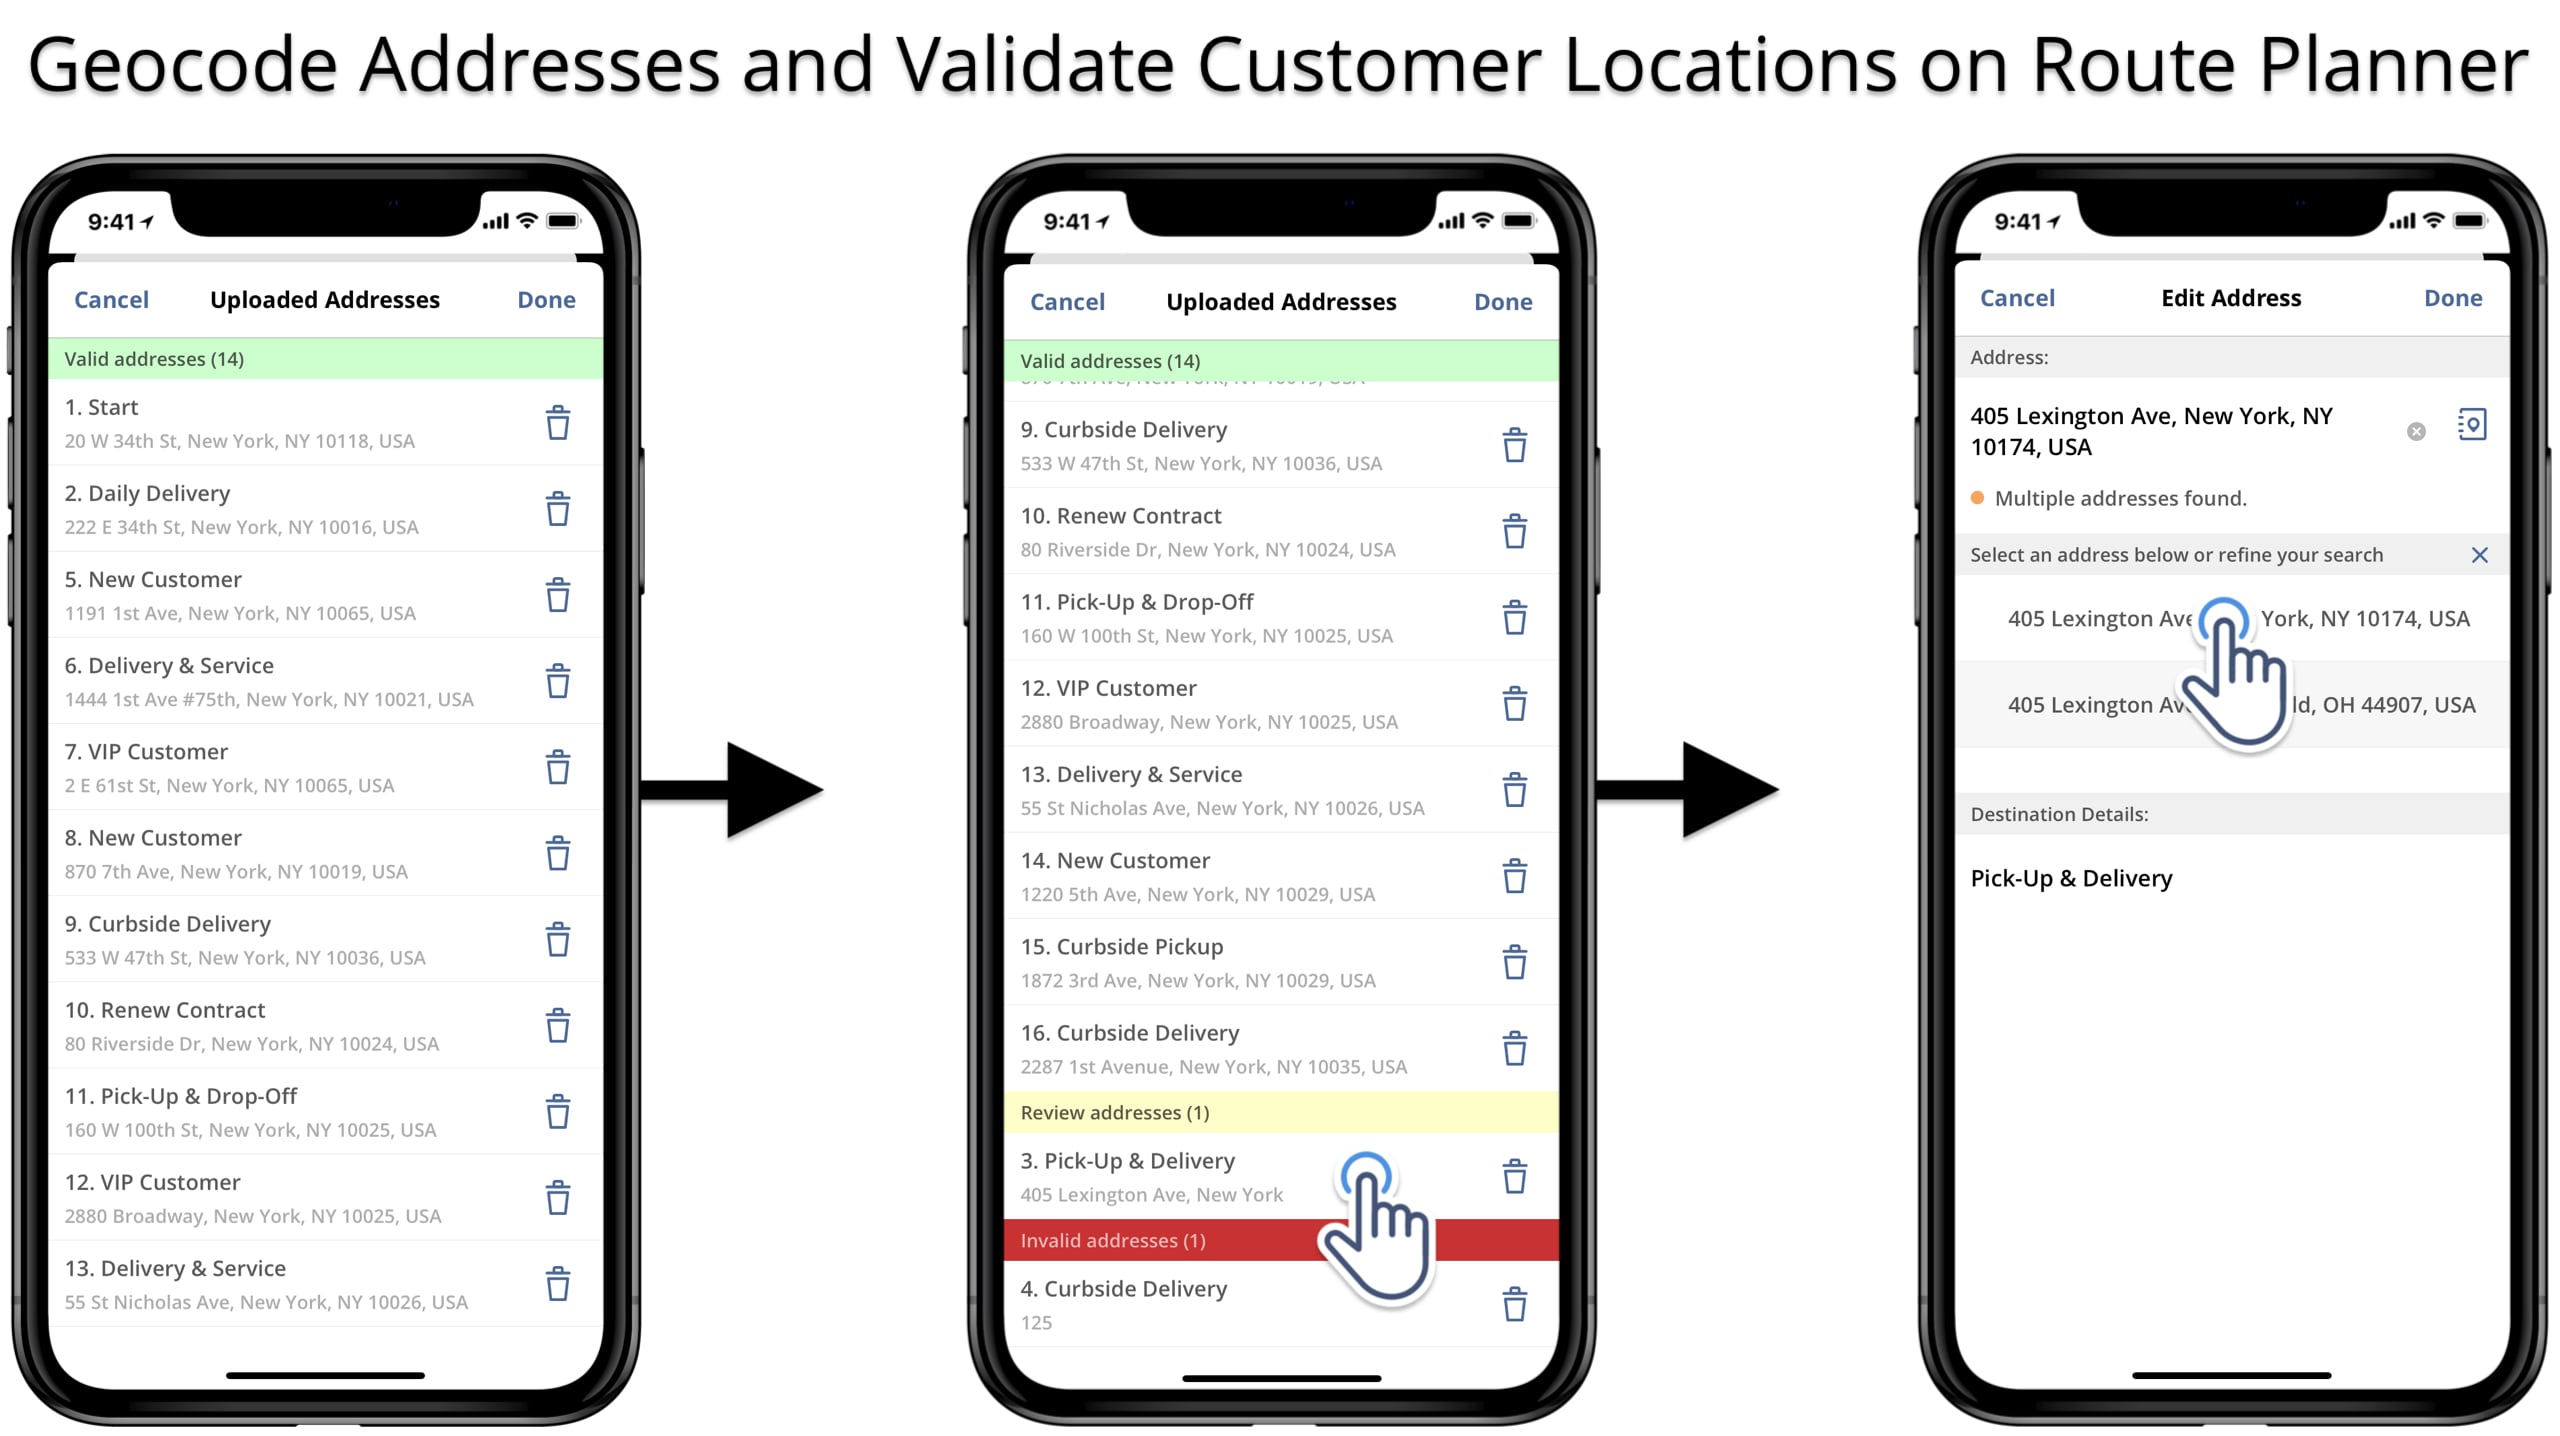 Geocode addresses and validate customer locations from the uploaded CSV file on route planner app.